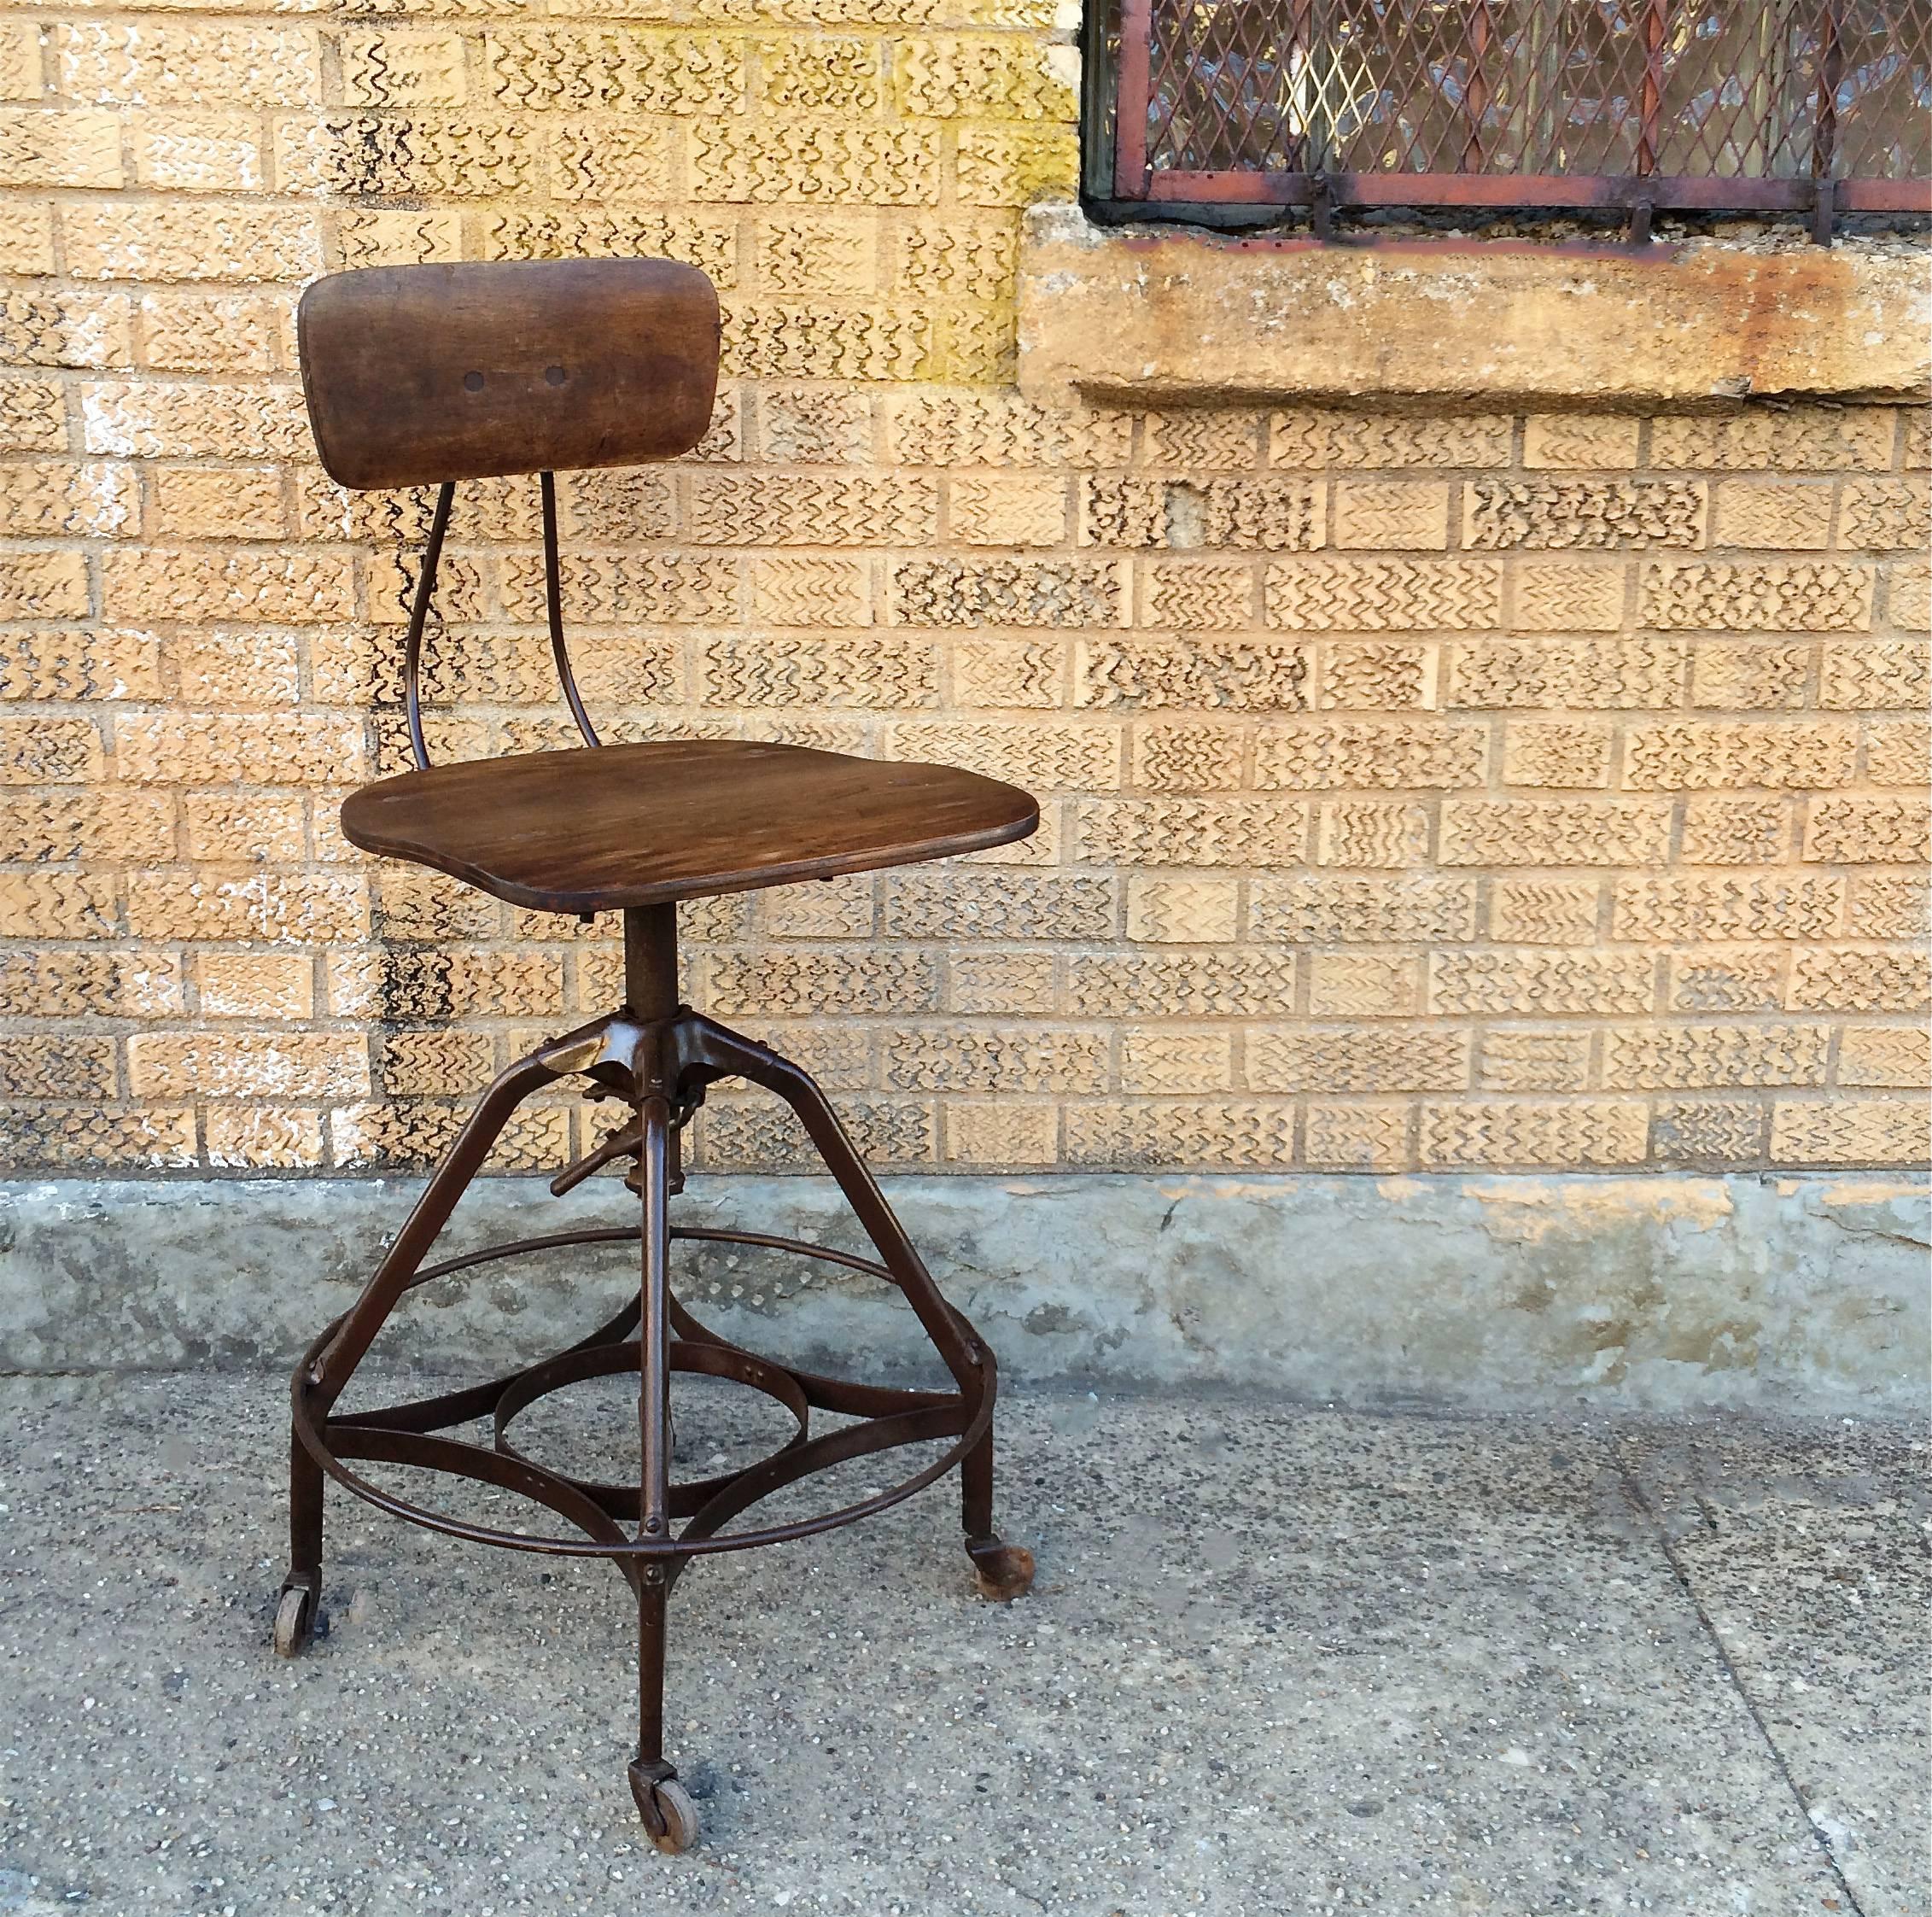 Early, Industrial drafting stool by Toledo Metal Furniture Co. with oak seat and back and painted steel frame. Seat height adjustable from 24